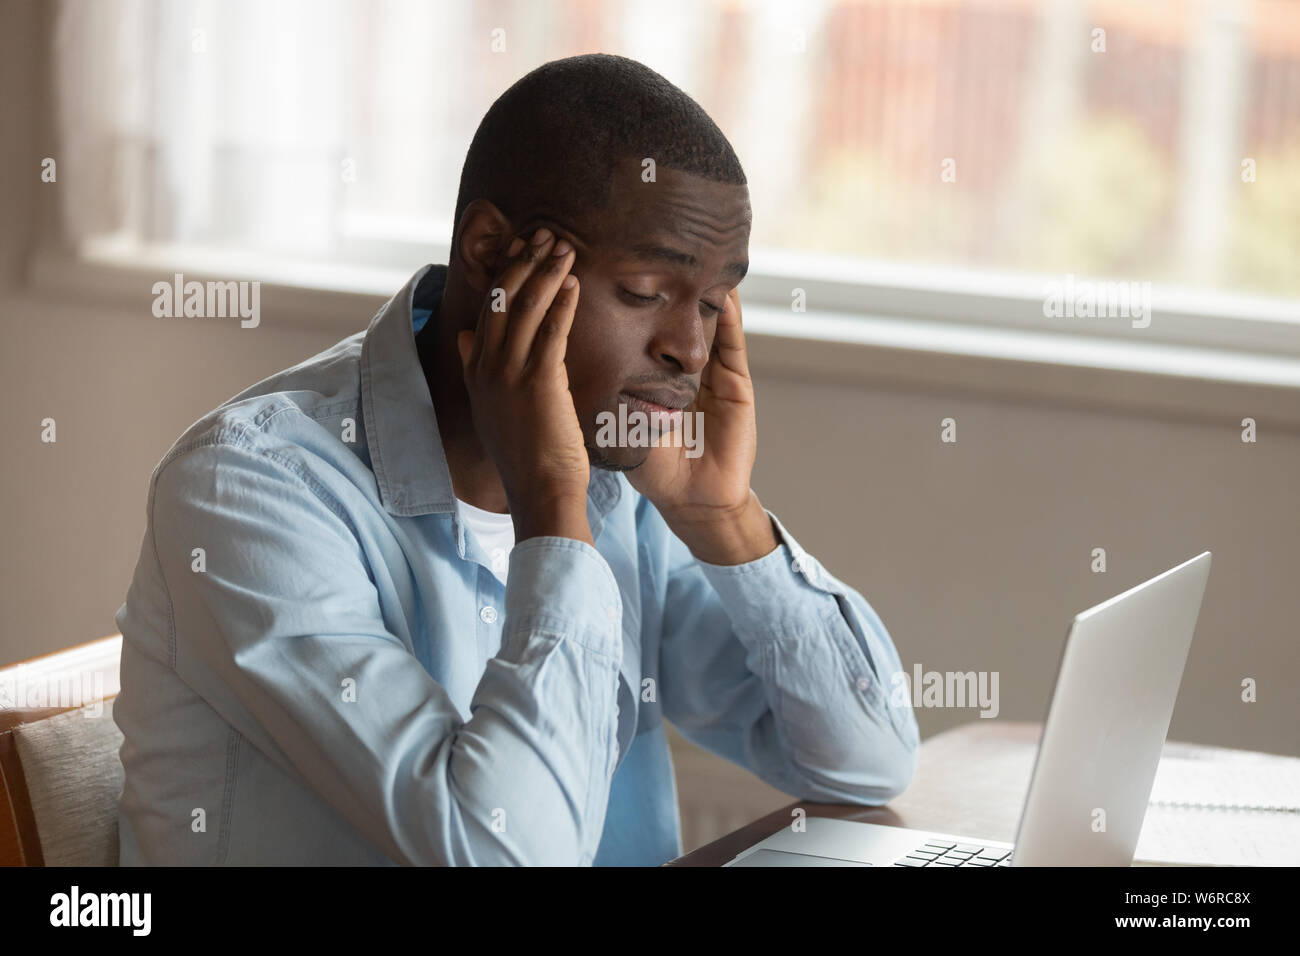 African guy sitting near computer rubbing temples feels unwell Stock Photo